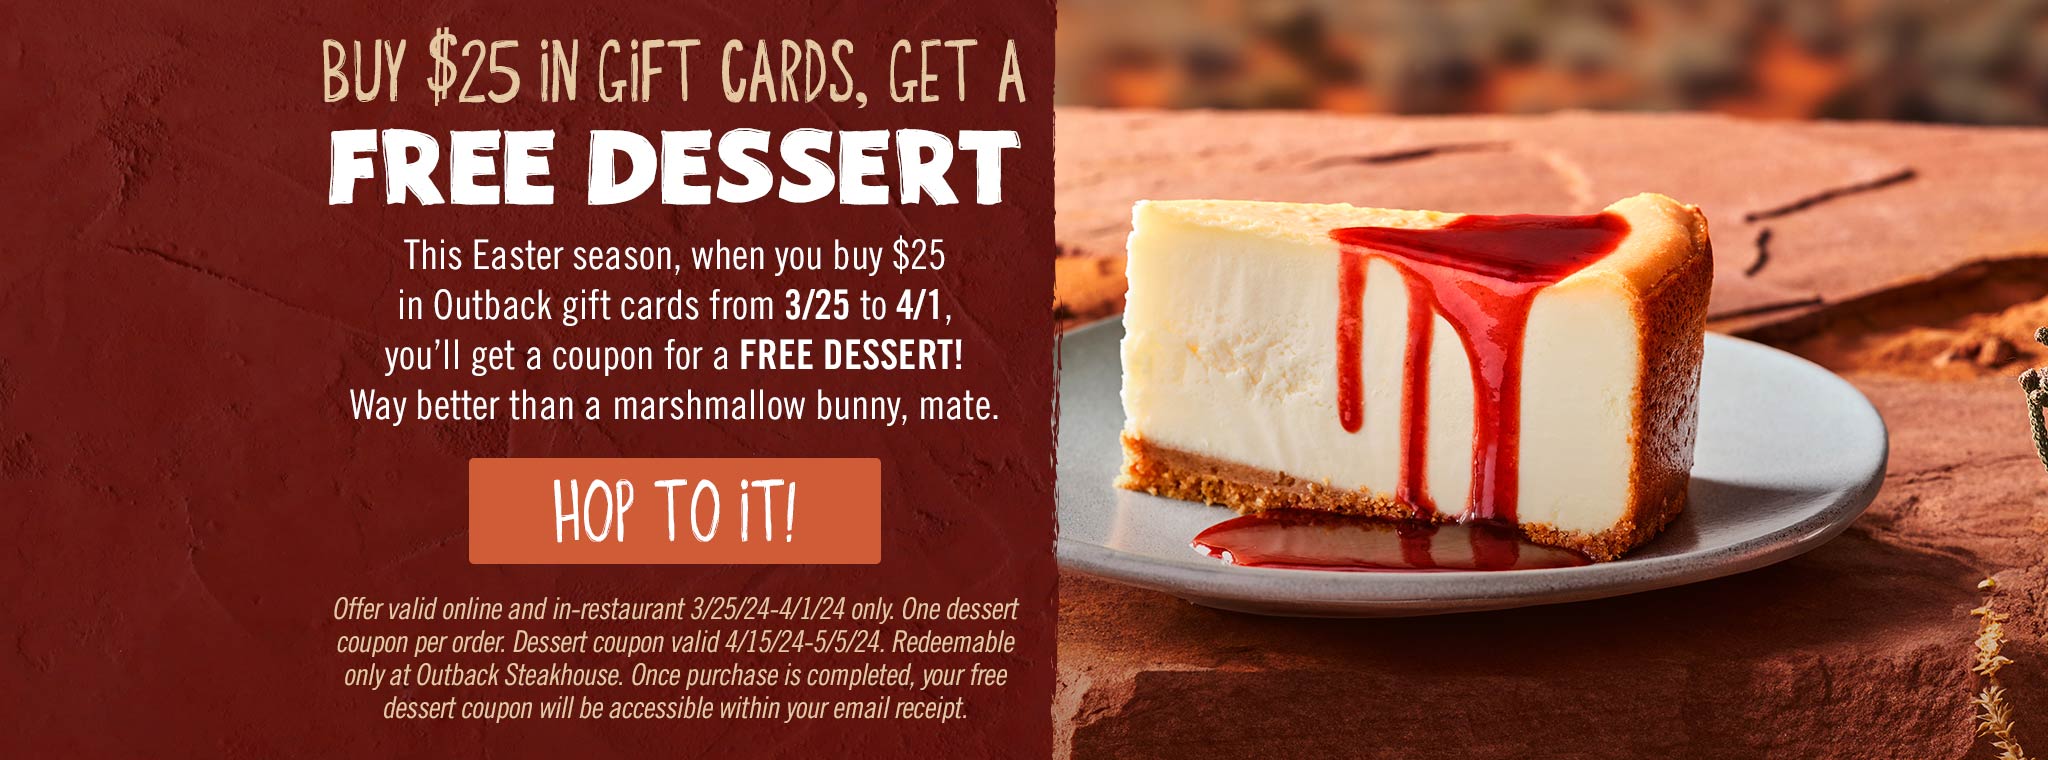 Buy $25 In Gift Cards, Get A Free Dessert. Hop To It!